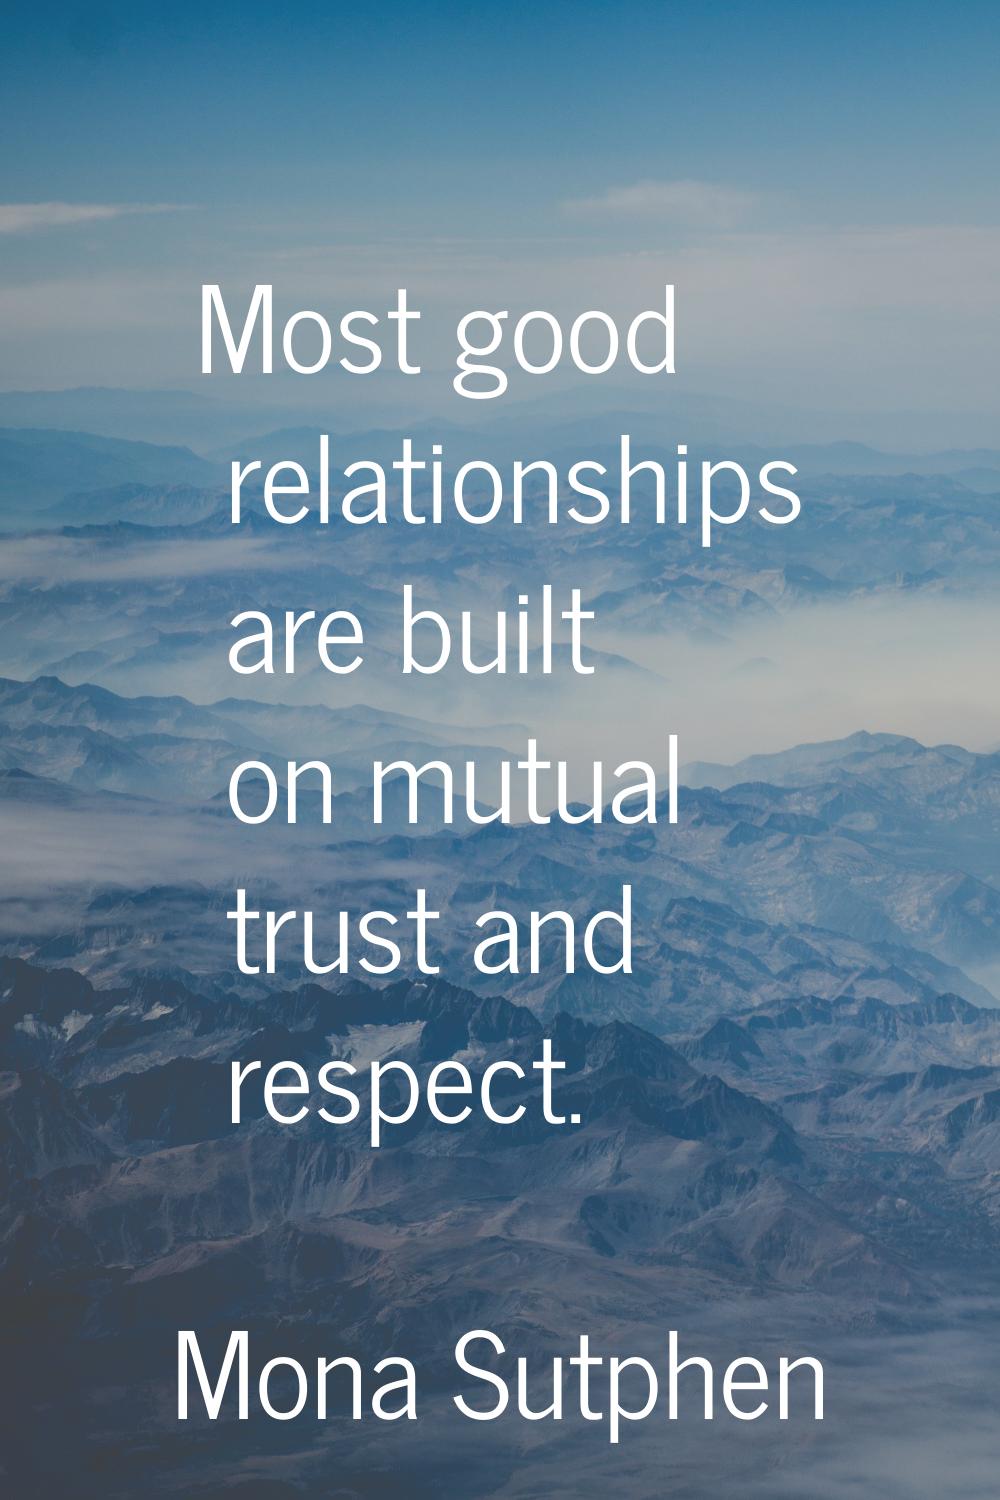 Most good relationships are built on mutual trust and respect.